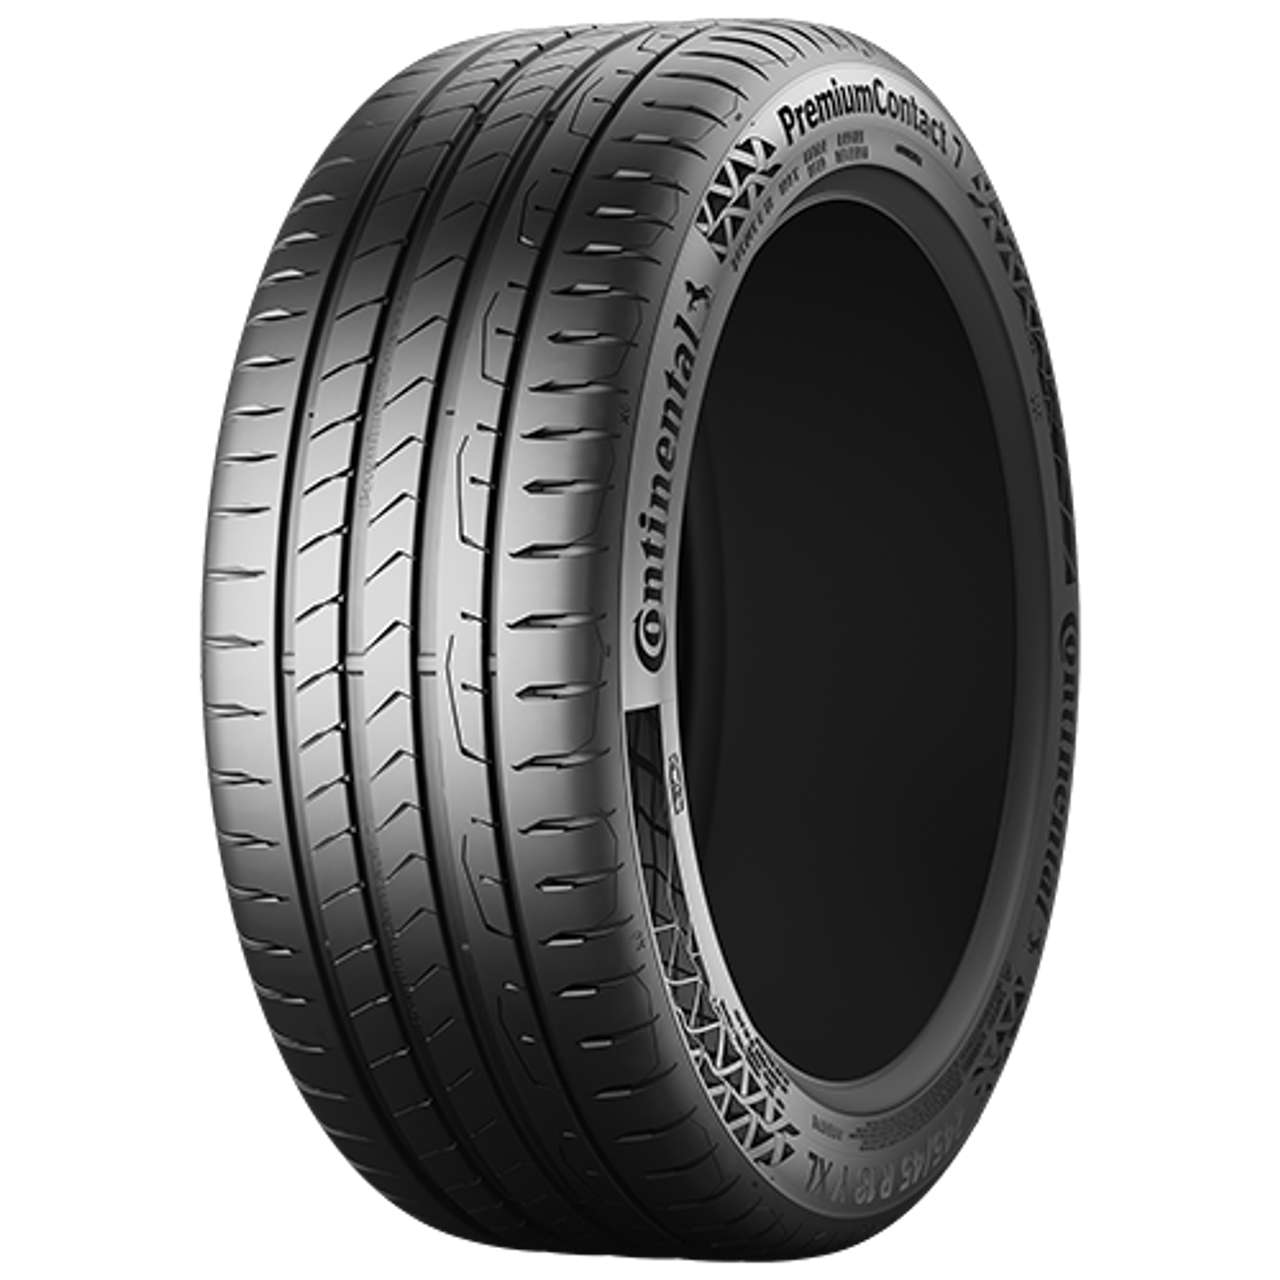 CONTINENTAL PREMIUMCONTACT 7 (EVc) 225/50R18 99W FR BSW